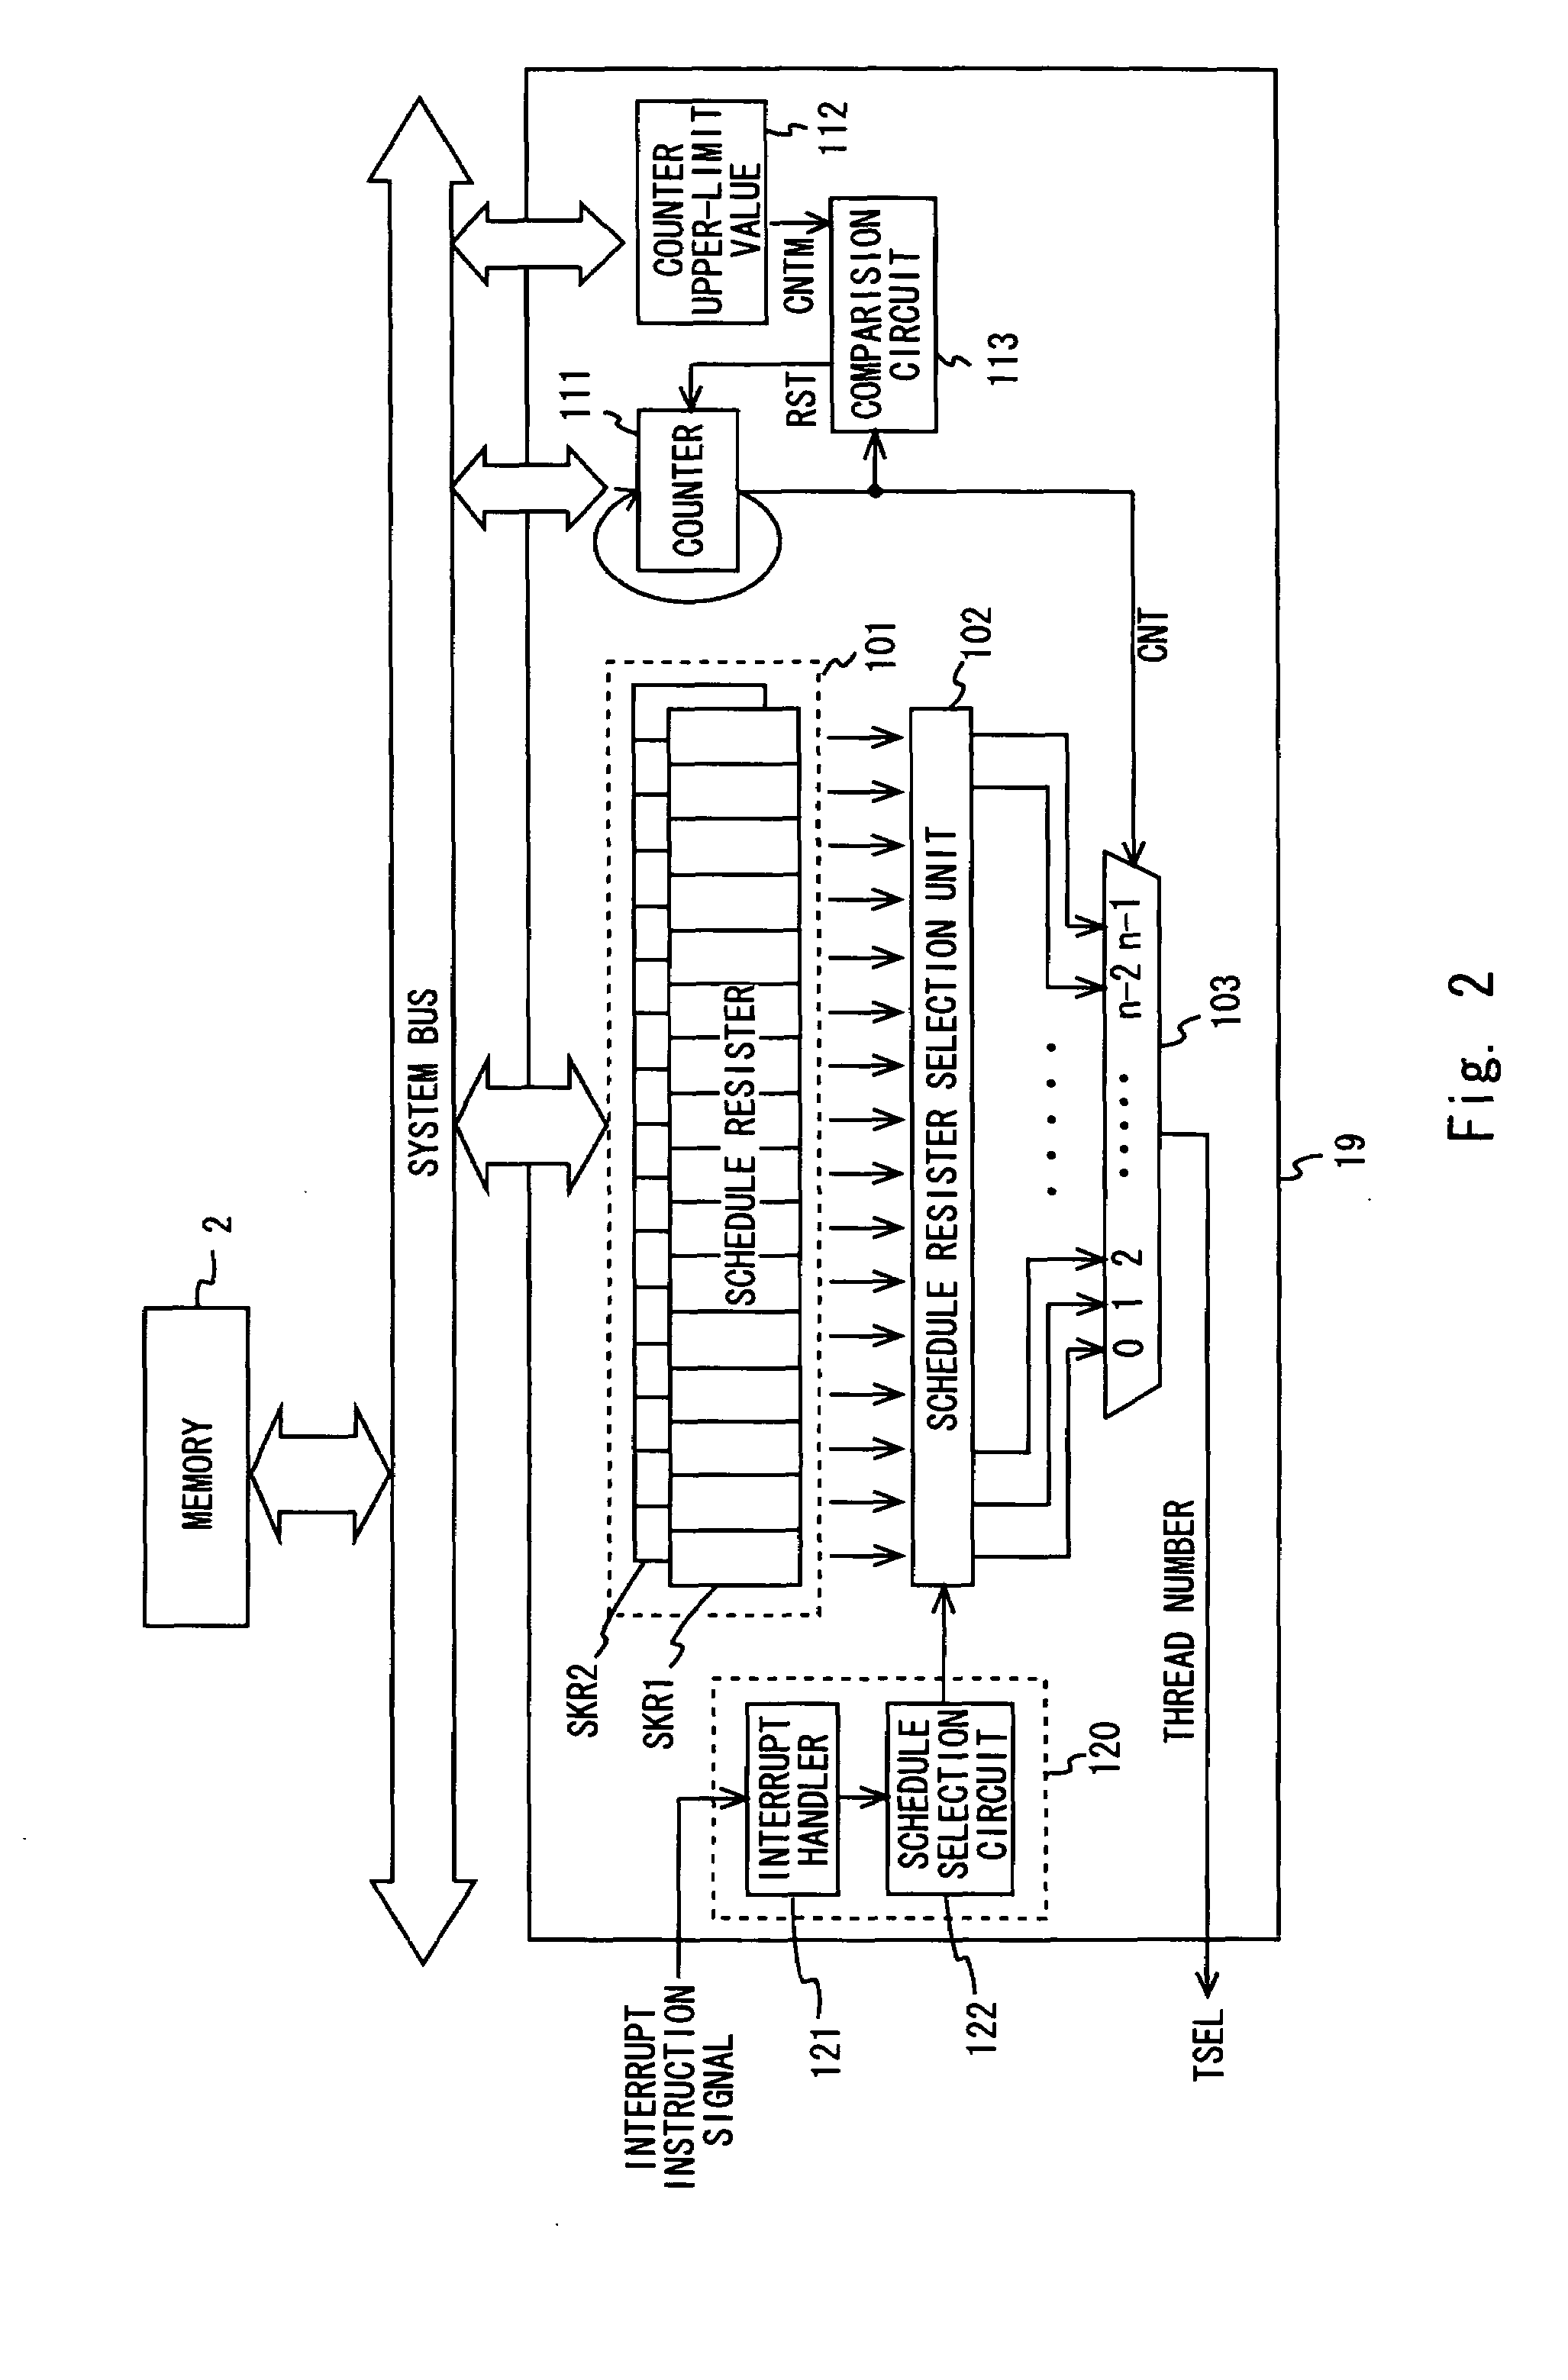 Multi-thread processor selecting threads on different schedule pattern for interrupt processing and normal operation